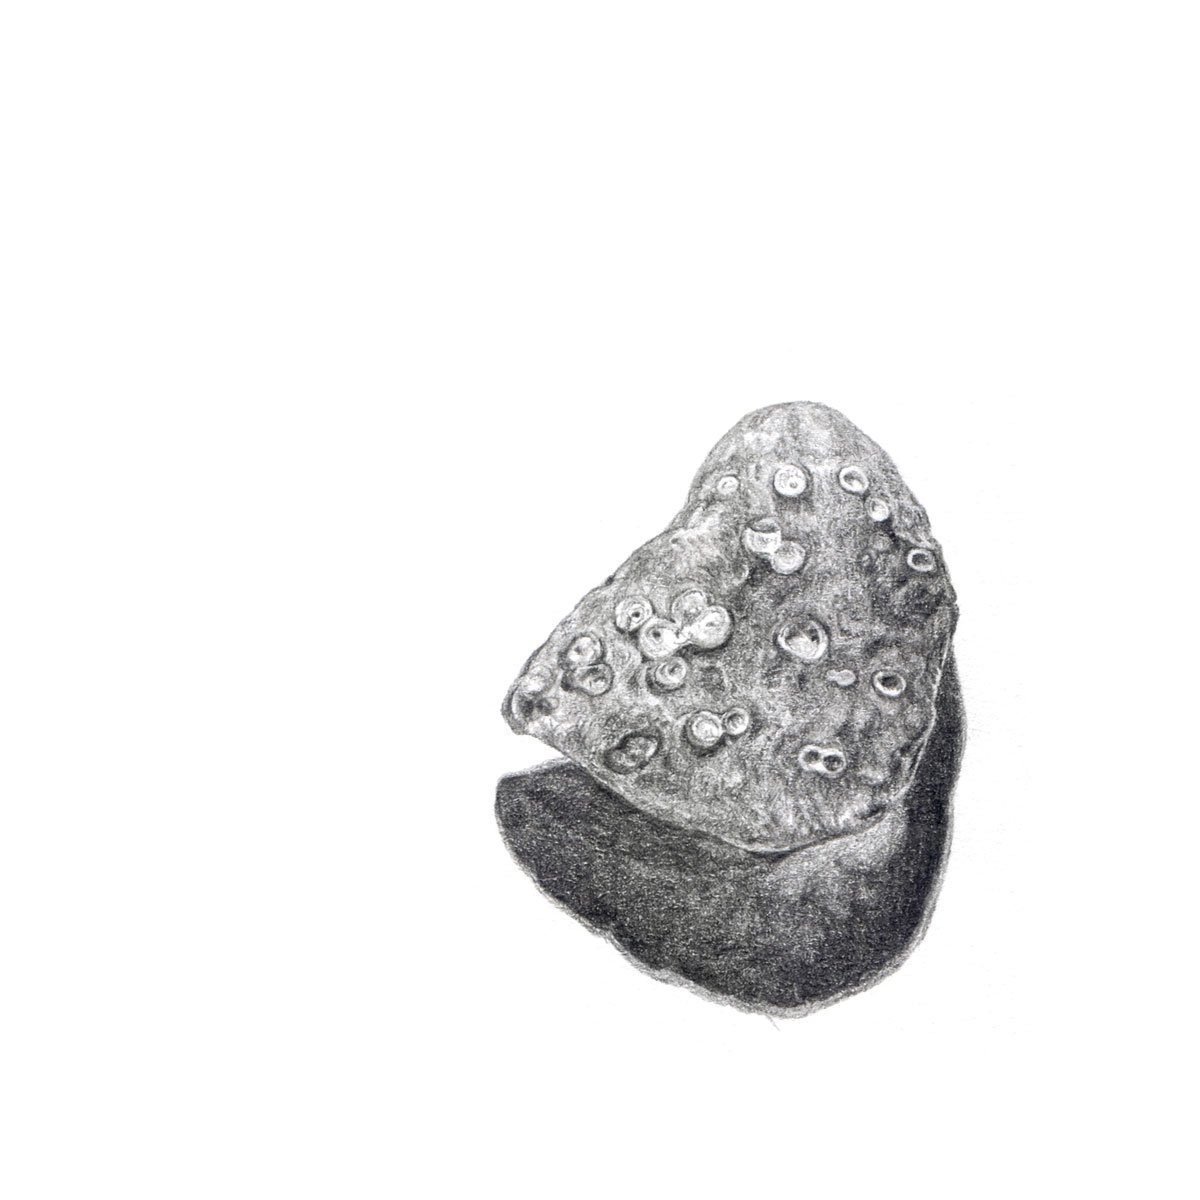 pencil drawing of a pebble from the beach